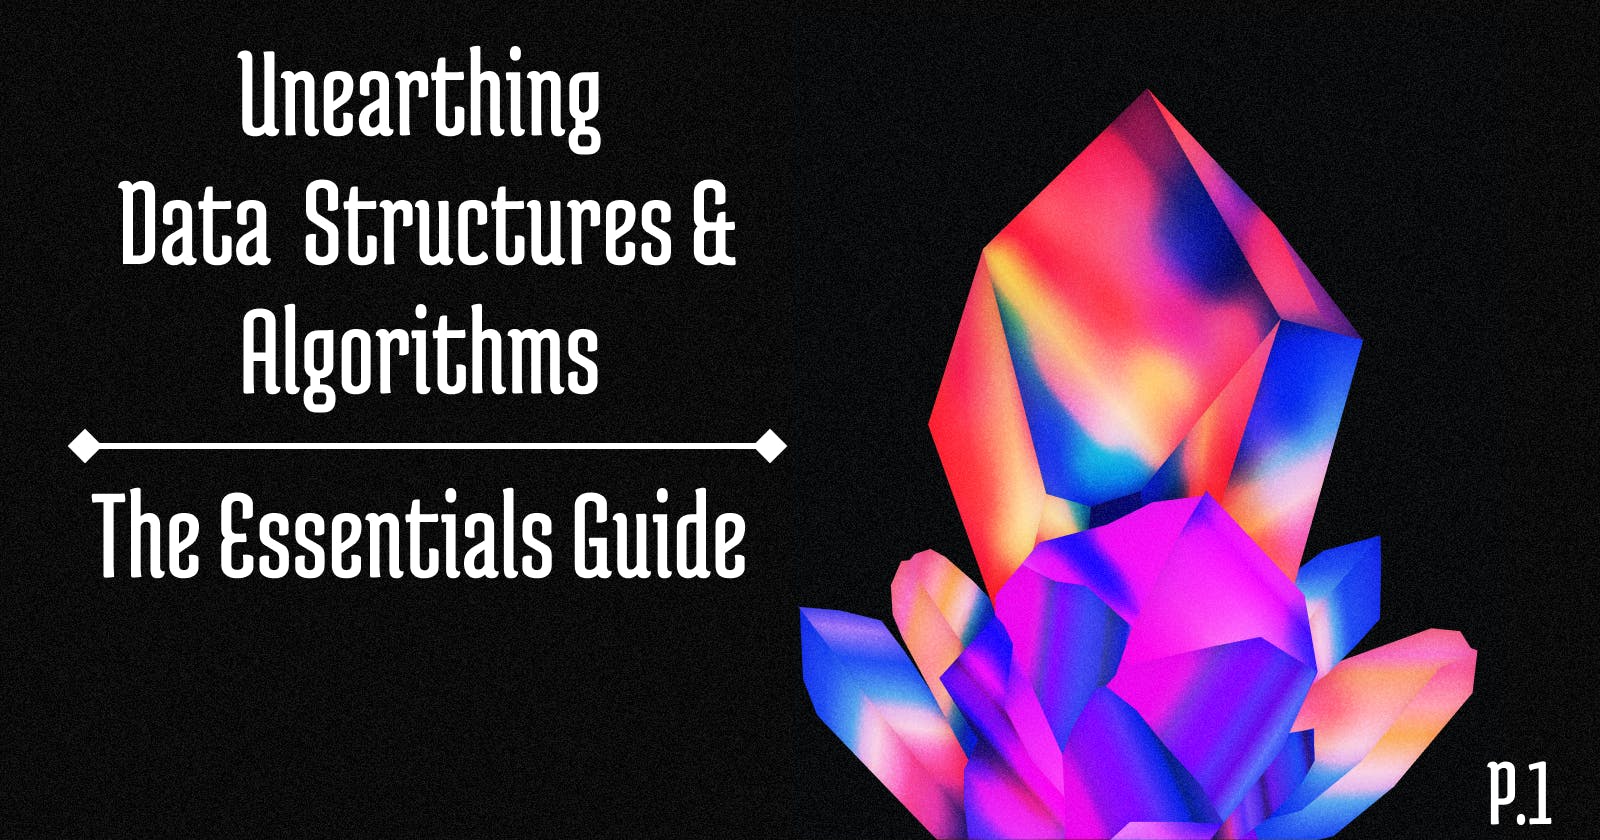 Unearthing Data Structures & Algorithms: The Essentials Guide